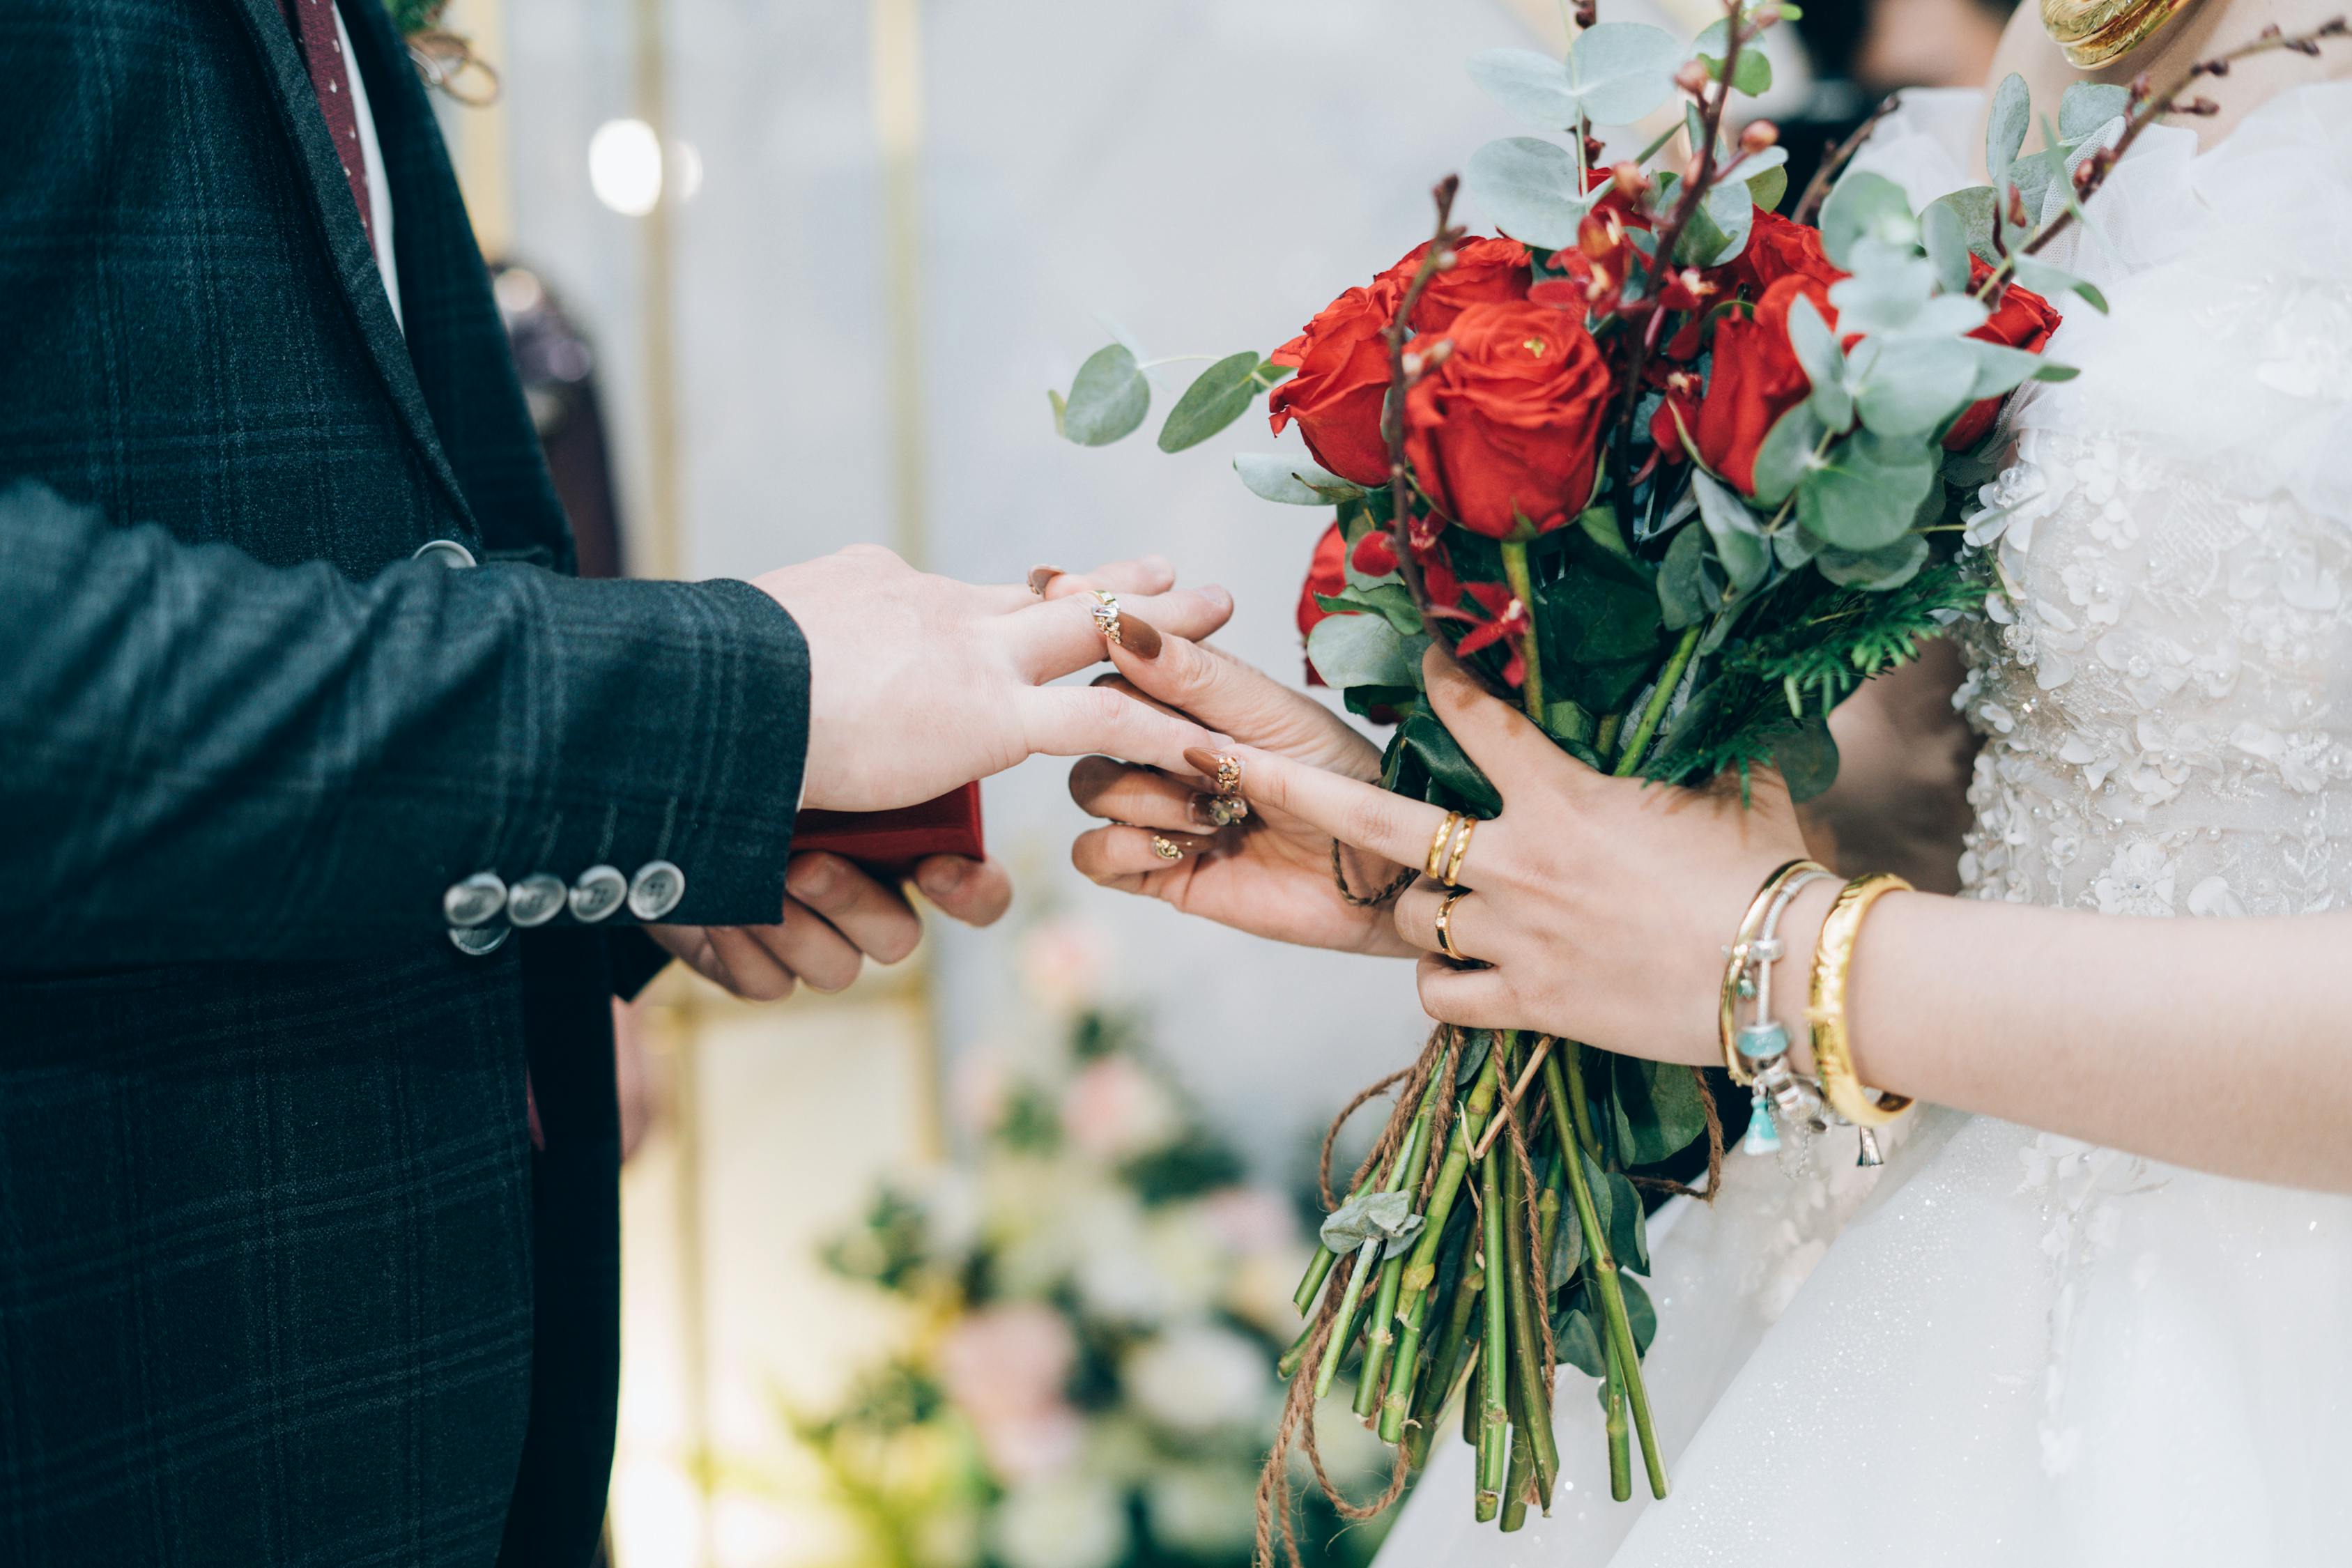 Groom and bride exchanging wedding rings · Free Stock Photo